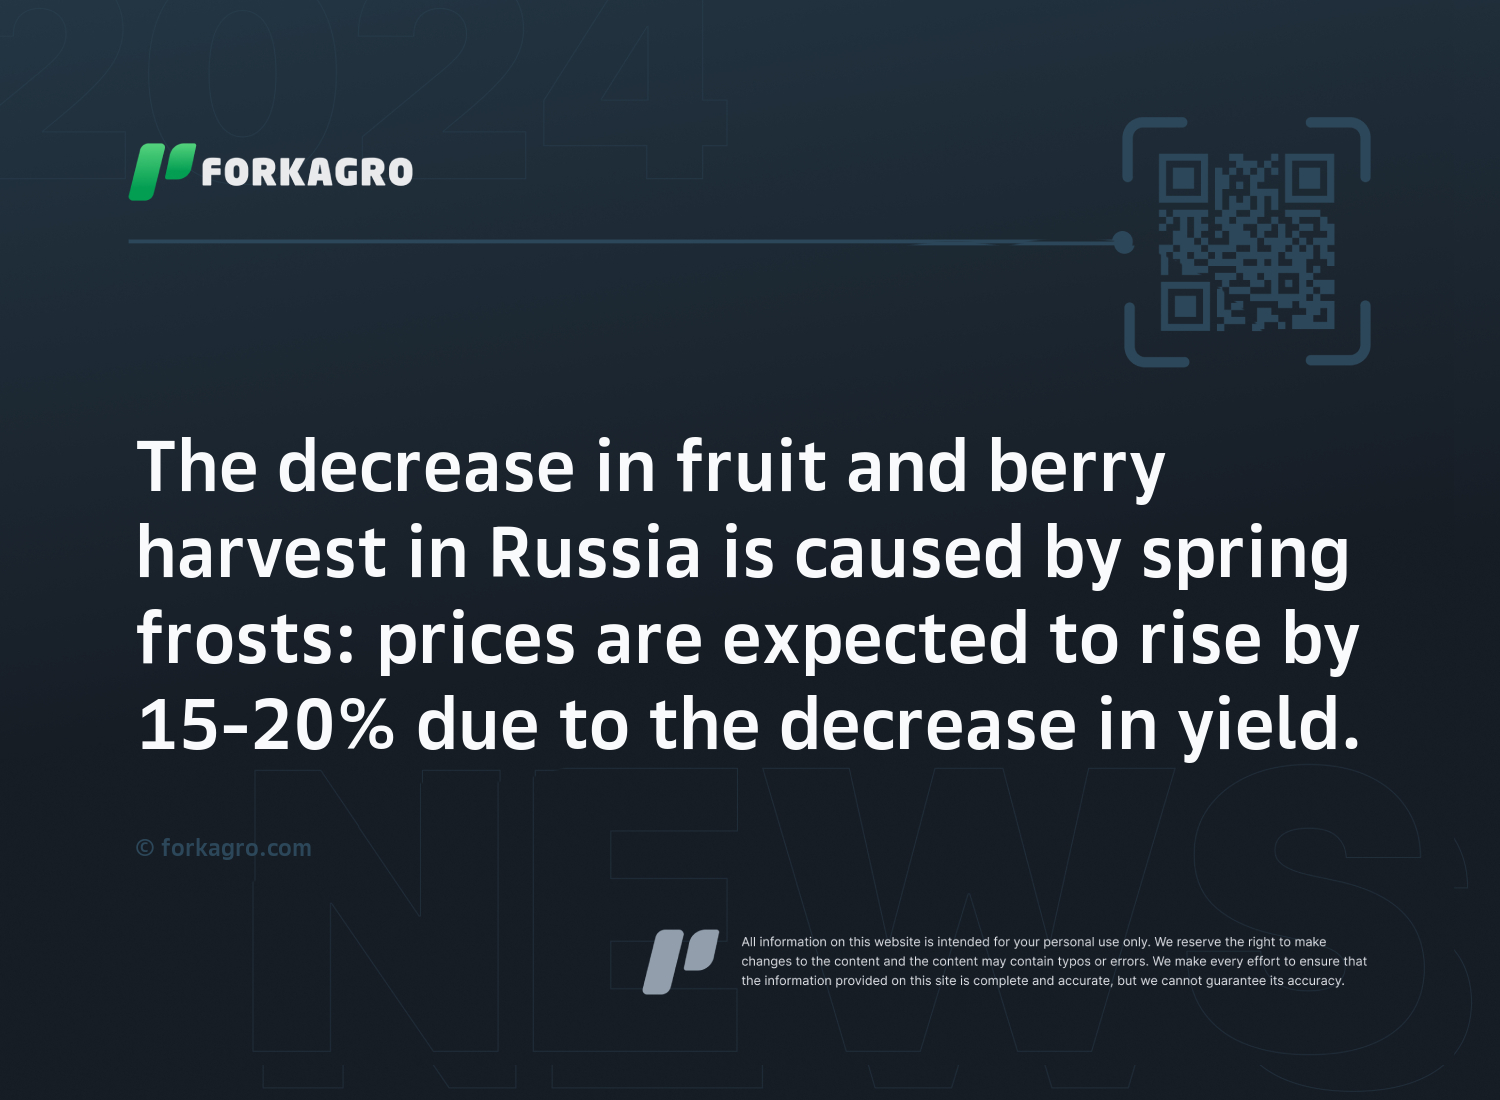 The decrease in fruit and berry harvest in Russia is caused by spring frosts: prices are expected to rise by 15-20% due to the decrease in yield.